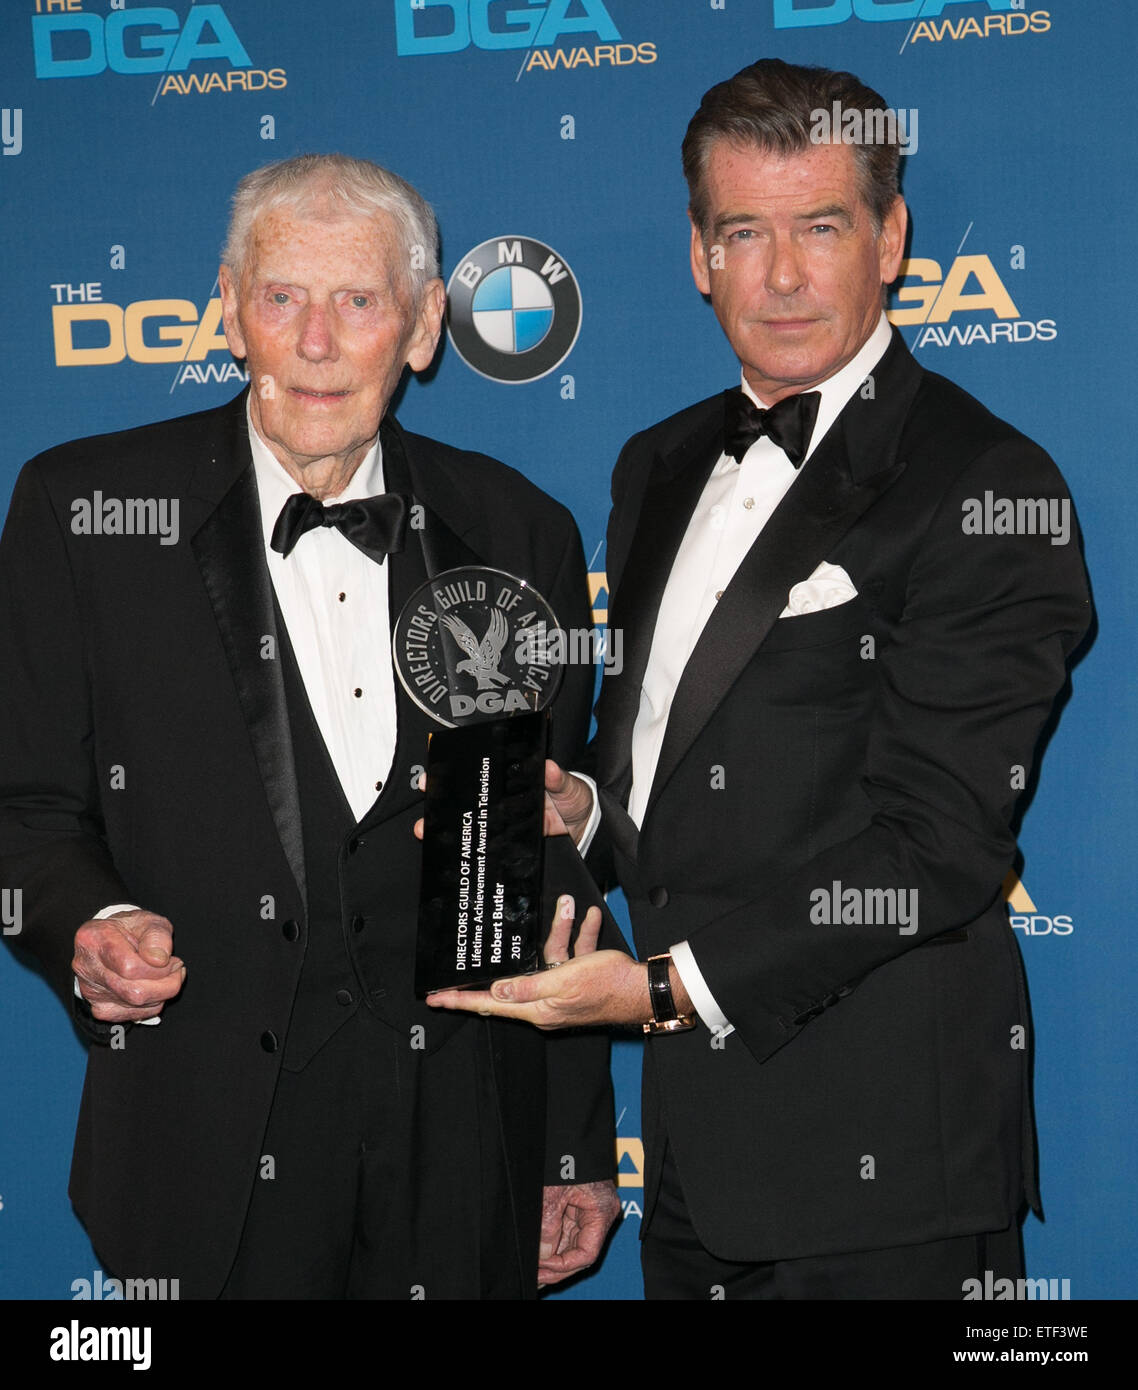 Celebrities attend 67th Annual DGA Awards - Press Room at the Hyatt Regency Century Plaza.  Featuring: Robert Butler, Pierce Brosnan Where: Los Angeles, California, United States When: 07 Feb 2015 Credit: Brian To/WENN.com Stock Photo